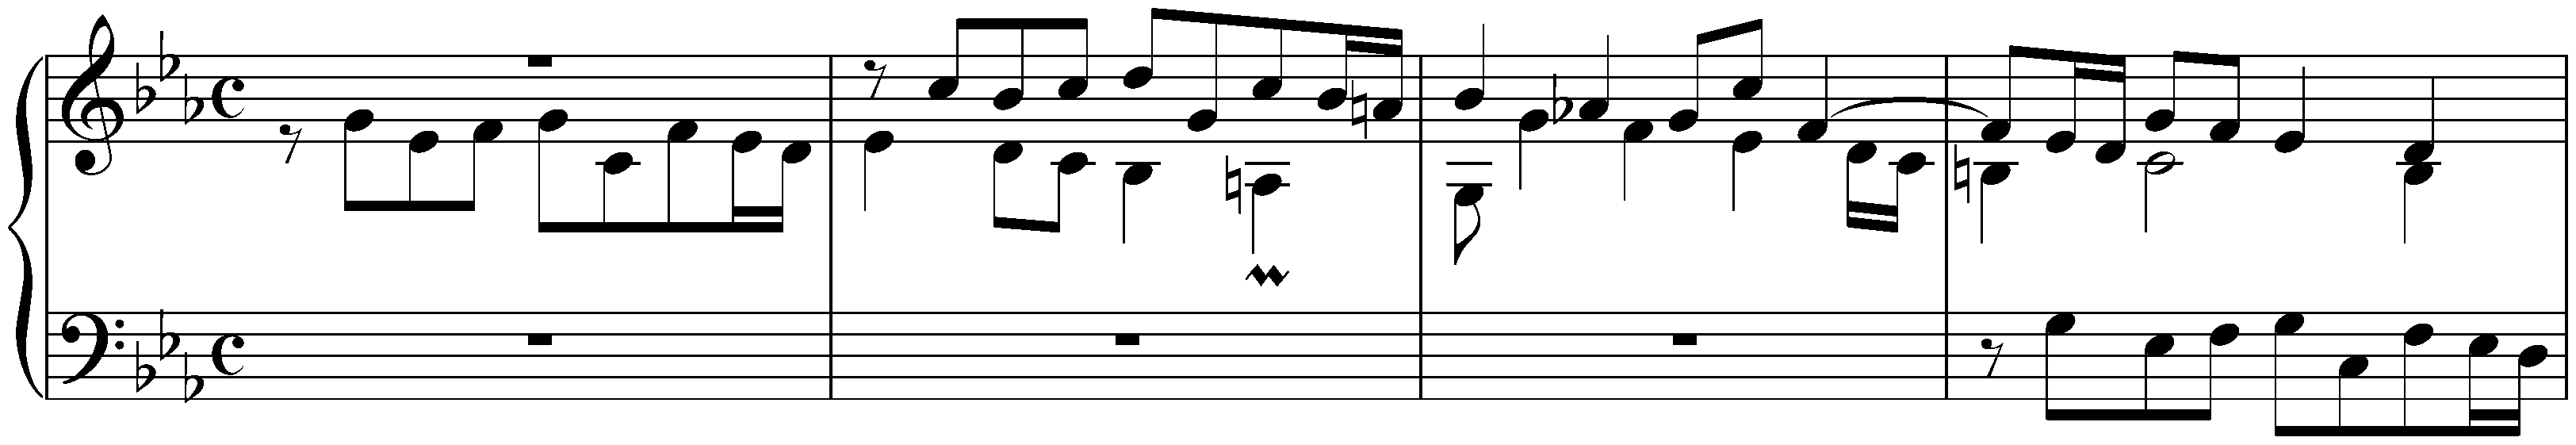 The Well-Tempered Clavier, Book 2, BWV 870–893; 2. C minor, BWV 871, Fugue